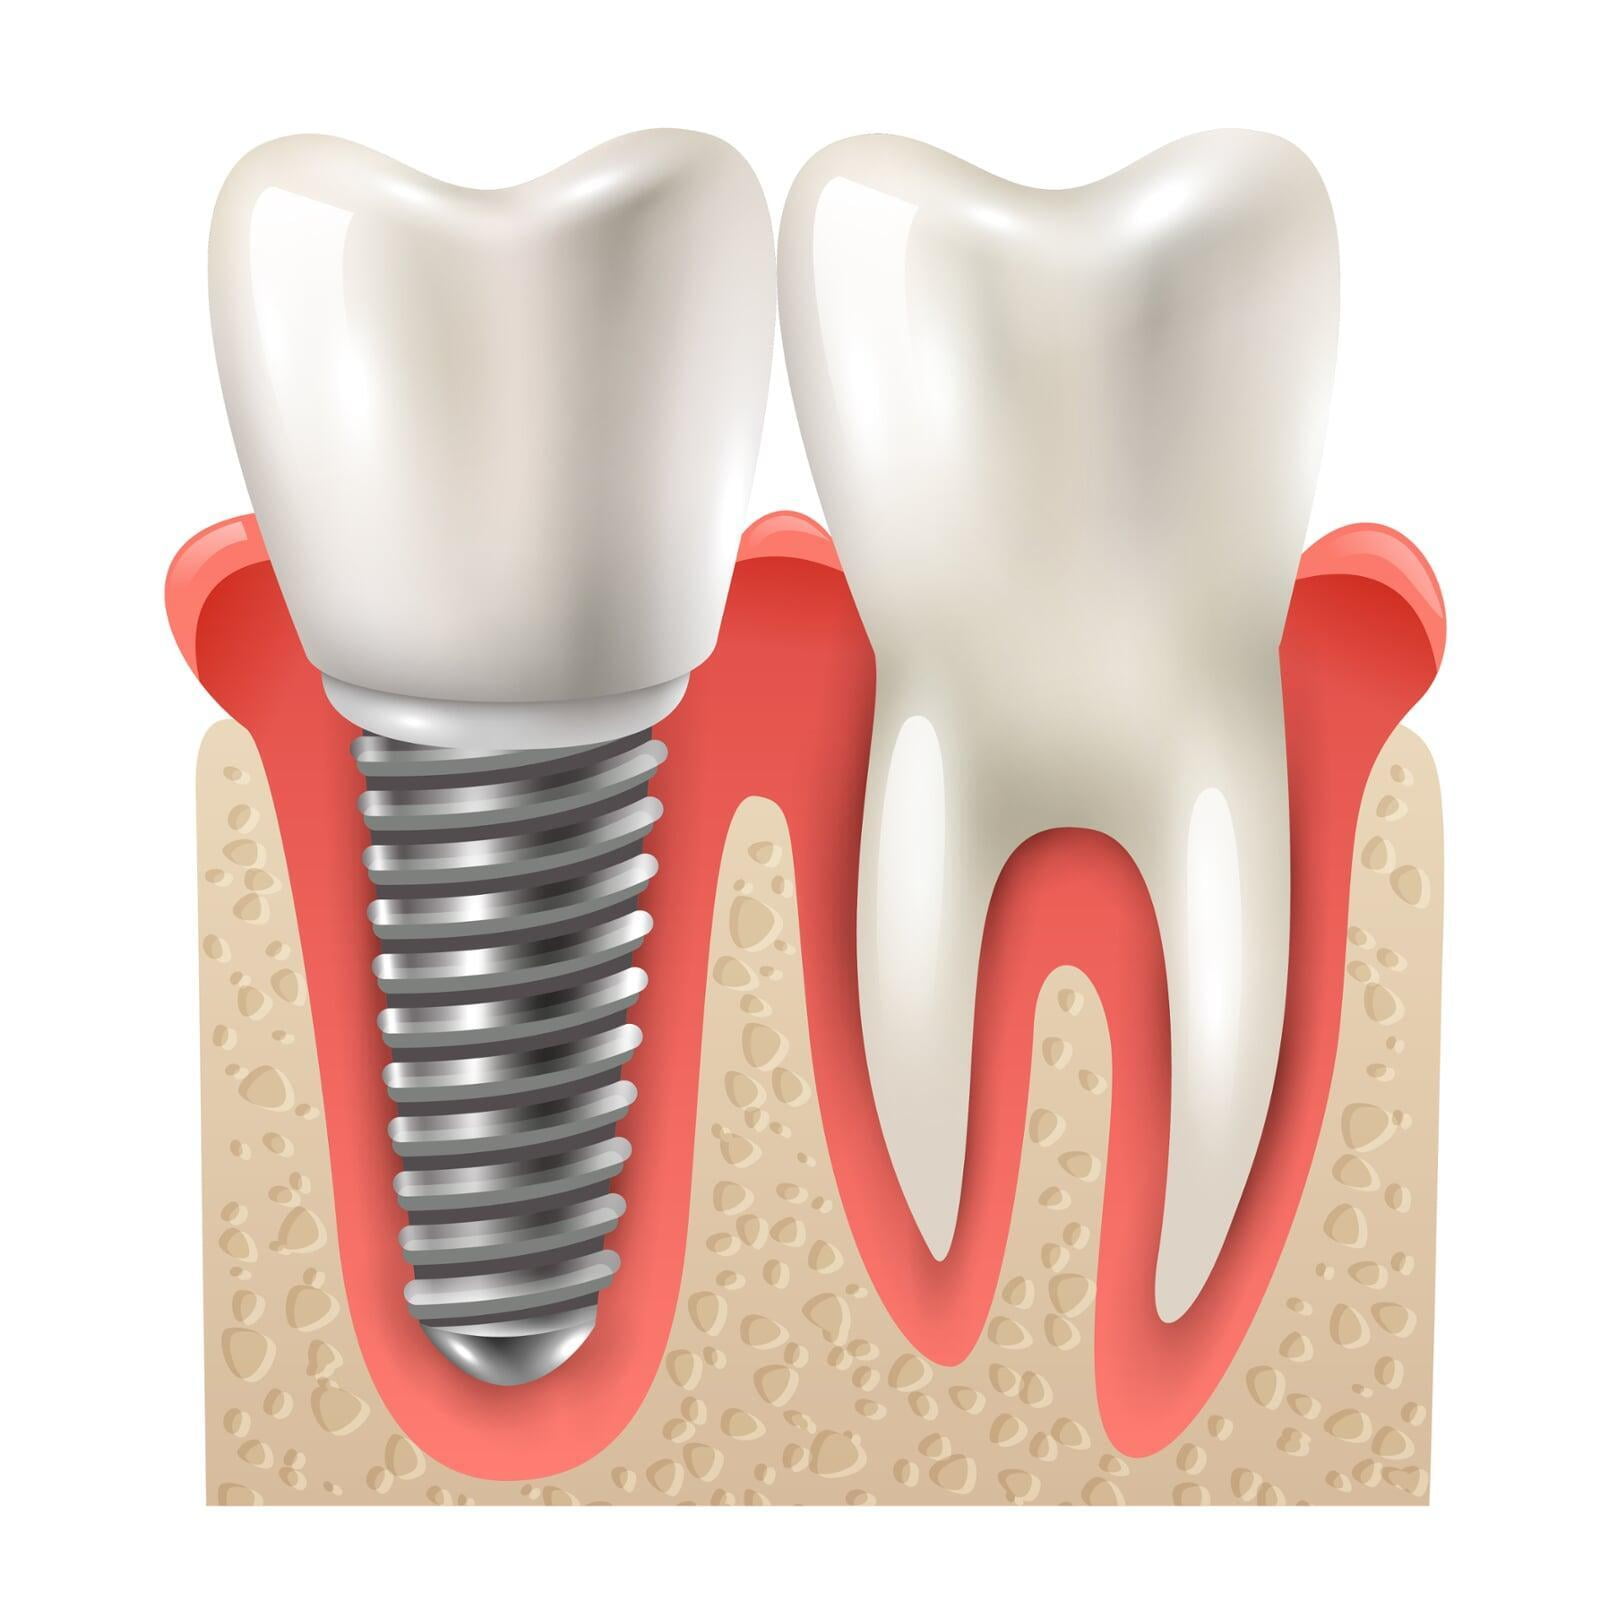 Failed Dental Implant: How to Care, Replace and Prevent Failure